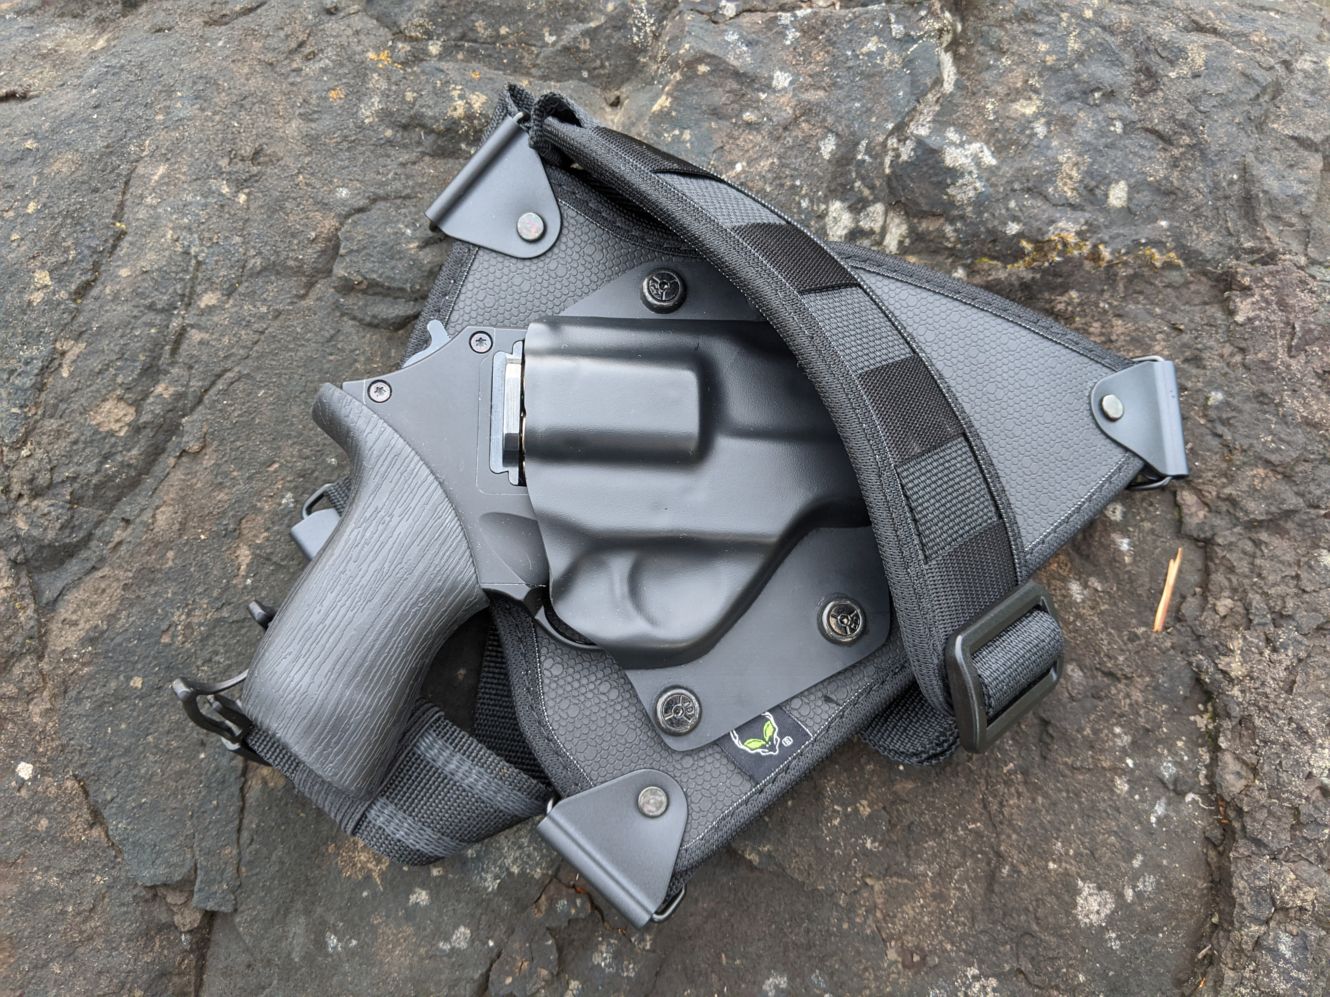 A review of the Alien Gear Cloak Chest Holster for the Chiappa Rhino 200DS